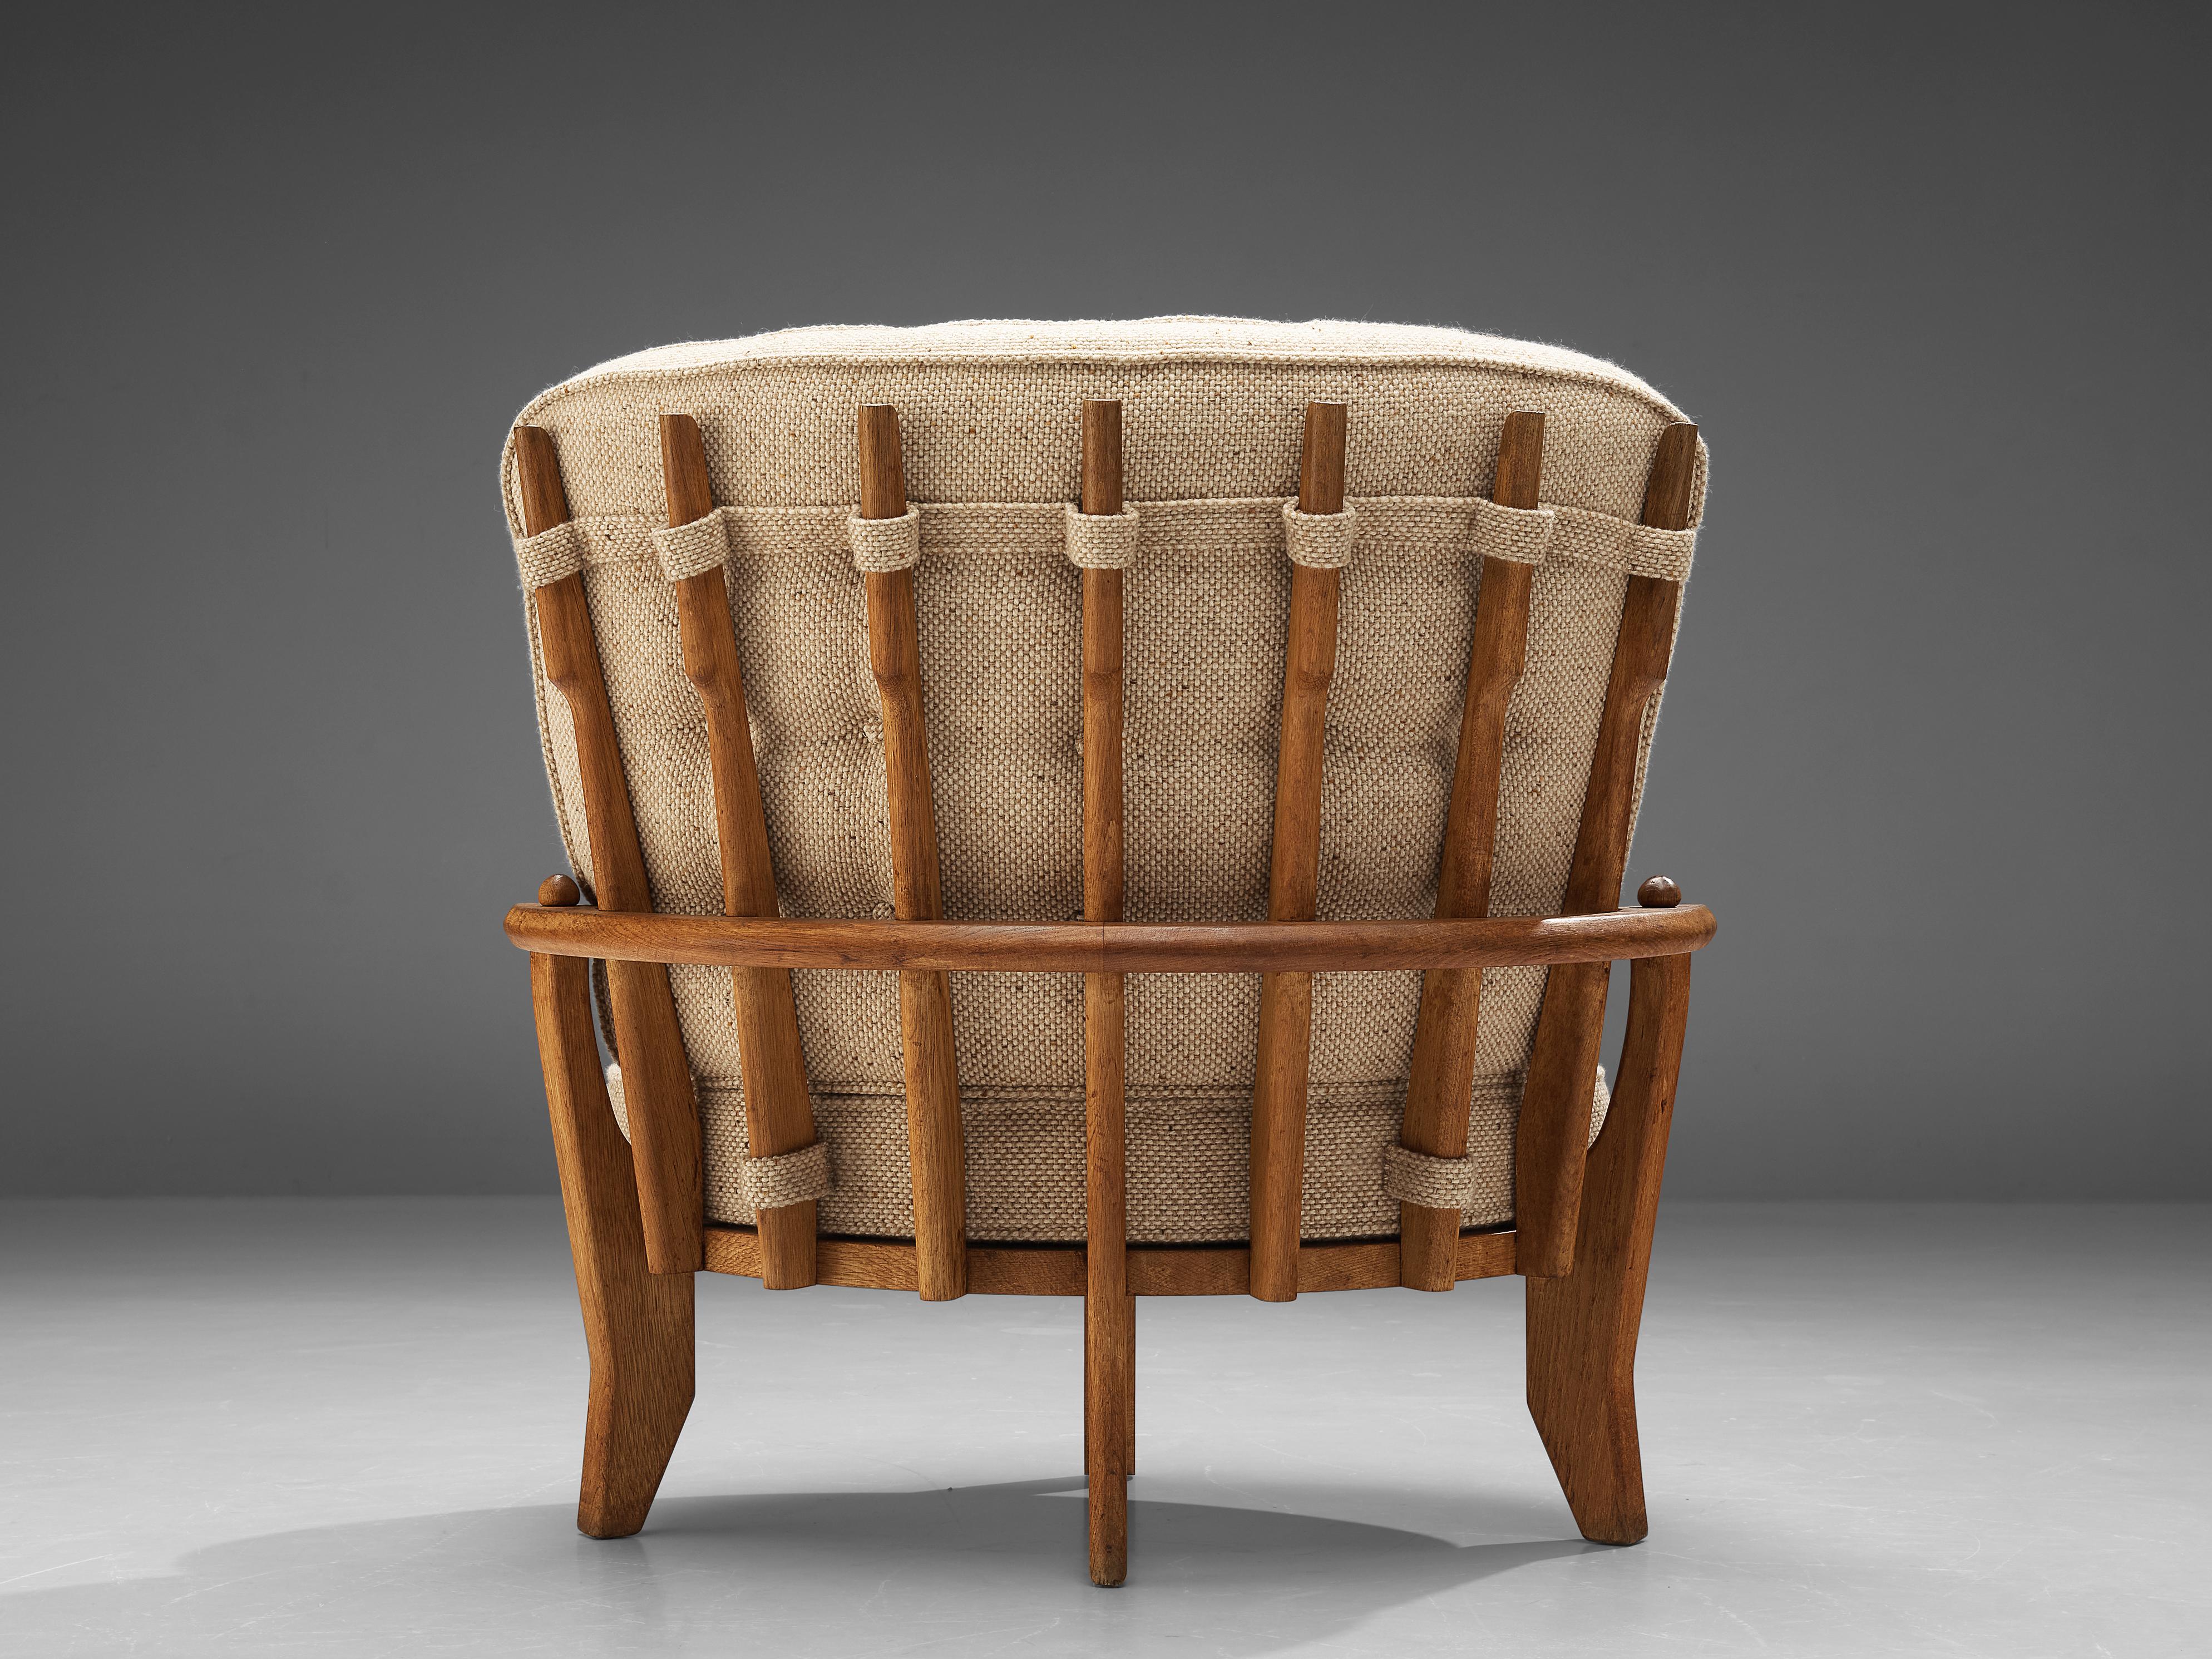 Guillerme & Chambron, lounge chair 'Tricoteuse', oak, fabric upholstery, France, 1960s 

Guillerme et Chambron designed the 'Tricoteuse' lounge chair in solid oak with the typical characteristic decorative details at the back and capricious shaped